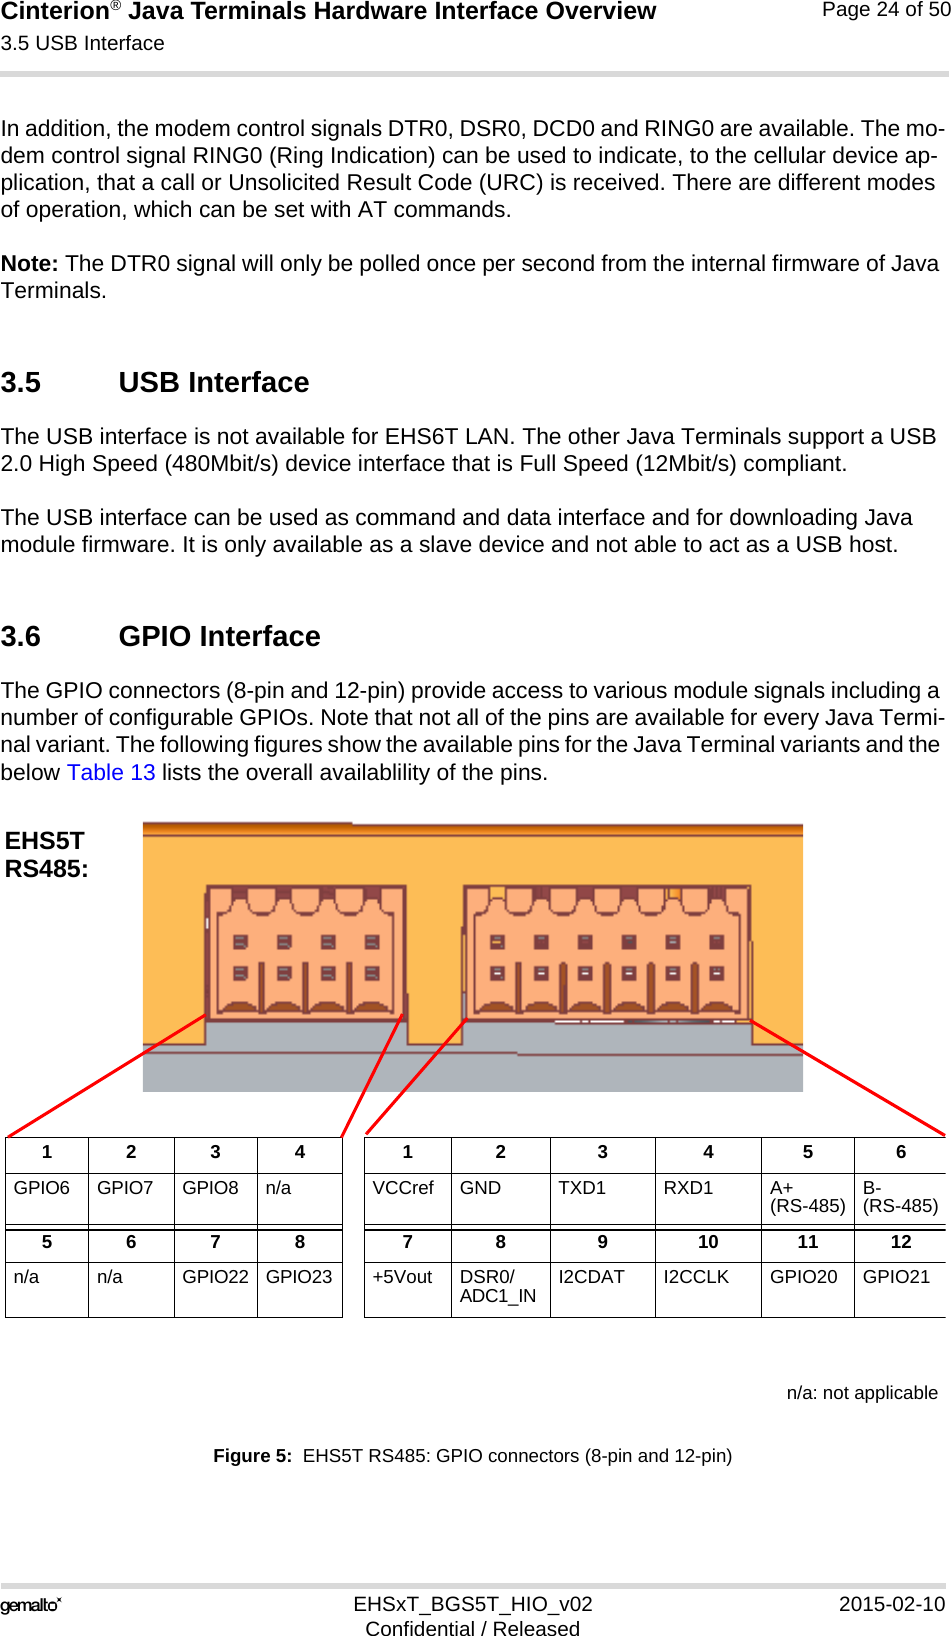 Cinterion® Java Terminals Hardware Interface Overview3.5 USB Interface39EHSxT_BGS5T_HIO_v02 2015-02-10Confidential / ReleasedPage 24 of 50In addition, the modem control signals DTR0, DSR0, DCD0 and RING0 are available. The mo-dem control signal RING0 (Ring Indication) can be used to indicate, to the cellular device ap-plication, that a call or Unsolicited Result Code (URC) is received. There are different modes of operation, which can be set with AT commands.Note: The DTR0 signal will only be polled once per second from the internal firmware of Java Terminals.3.5 USB InterfaceThe USB interface is not available for EHS6T LAN. The other Java Terminals support a USB 2.0 High Speed (480Mbit/s) device interface that is Full Speed (12Mbit/s) compliant. The USB interface can be used as command and data interface and for downloading Java module firmware. It is only available as a slave device and not able to act as a USB host. 3.6 GPIO InterfaceThe GPIO connectors (8-pin and 12-pin) provide access to various module signals including a number of configurable GPIOs. Note that not all of the pins are available for every Java Termi-nal variant. The following figures show the available pins for the Java Terminal variants and the below Table 13 lists the overall availablility of the pins.Figure 5:  EHS5T RS485: GPIO connectors (8-pin and 12-pin)1234 1 2 3 4 5 6GPIO6 GPIO7 GPIO8 n/a VCCref GND TXD1 RXD1 A+(RS-485) B-(RS-485)5678 7 8 9 10 1112n/a n/a GPIO22 GPIO23 +5Vout DSR0/ADC1_IN I2CDAT I2CCLK GPIO20 GPIO21EHS5Tn/a: not applicableRS485: